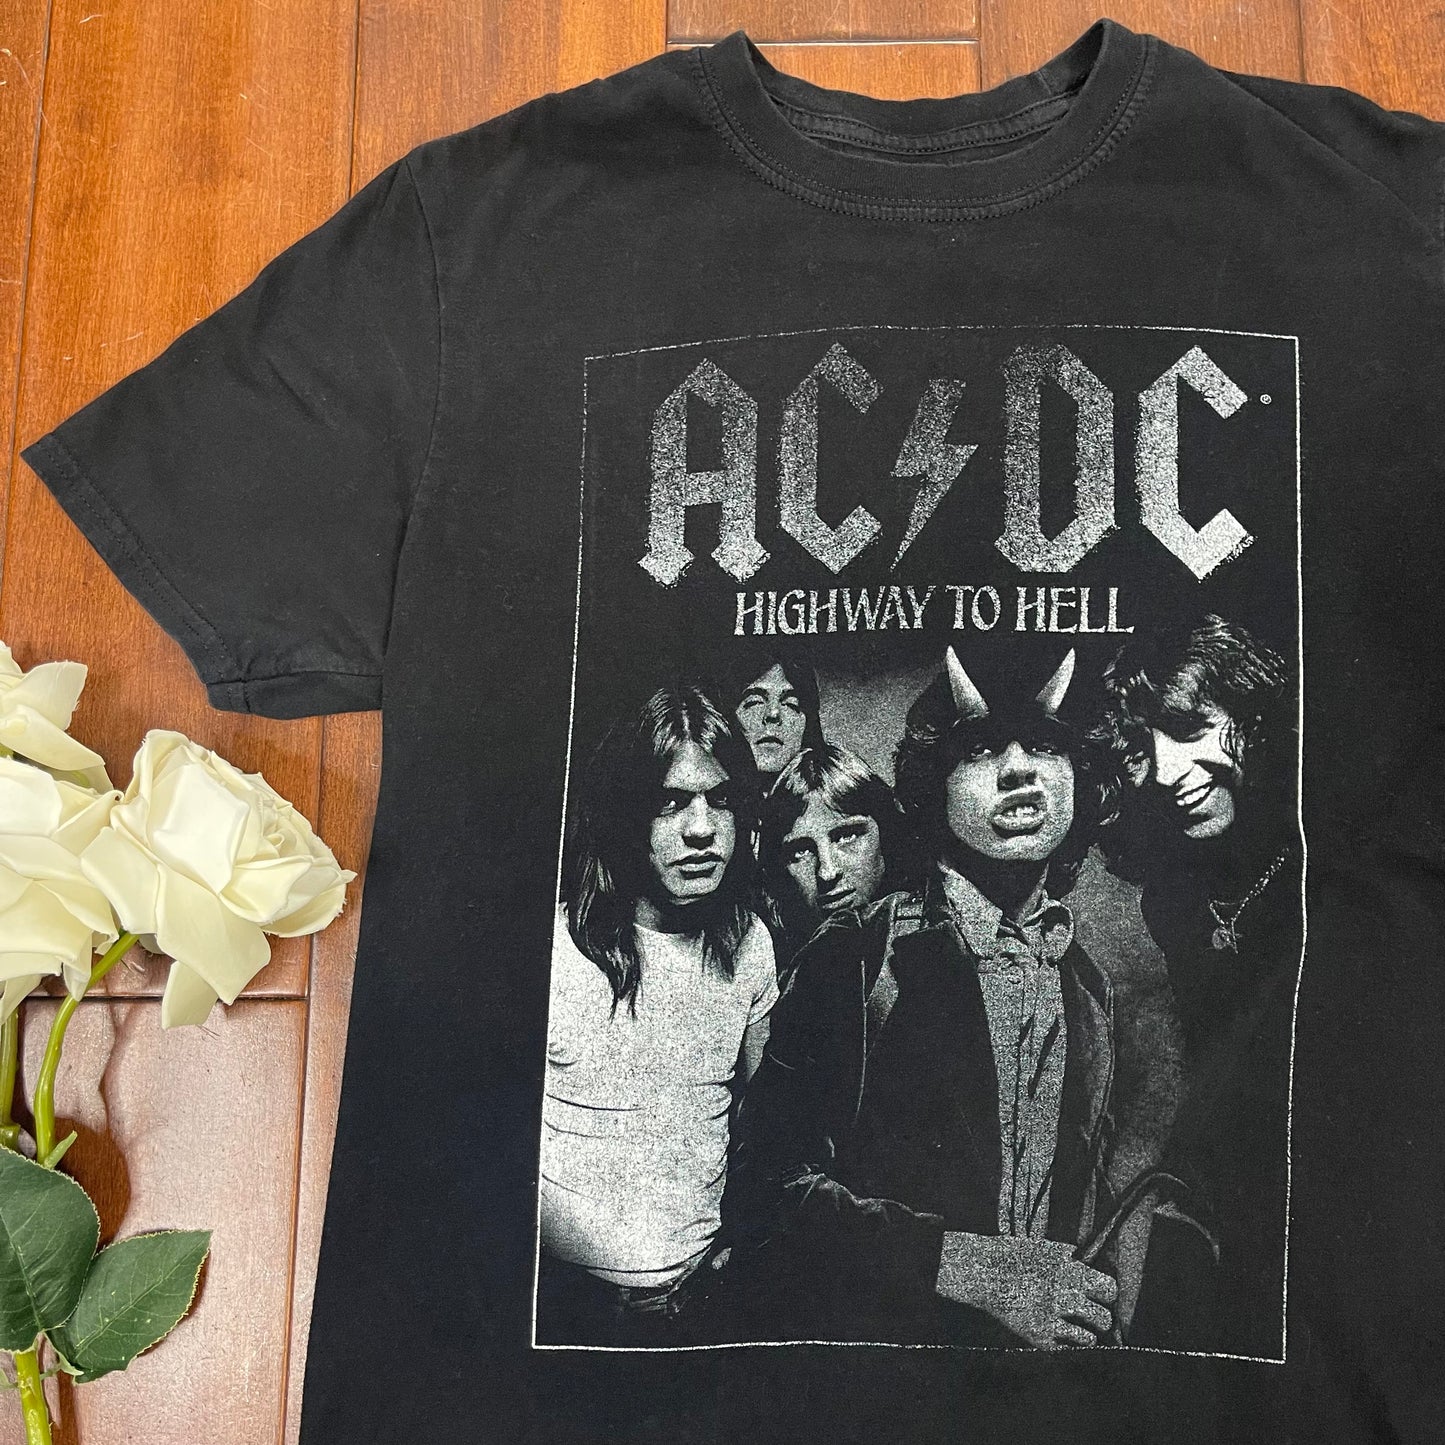 THRIFTED “ACDC” T-SHIRT